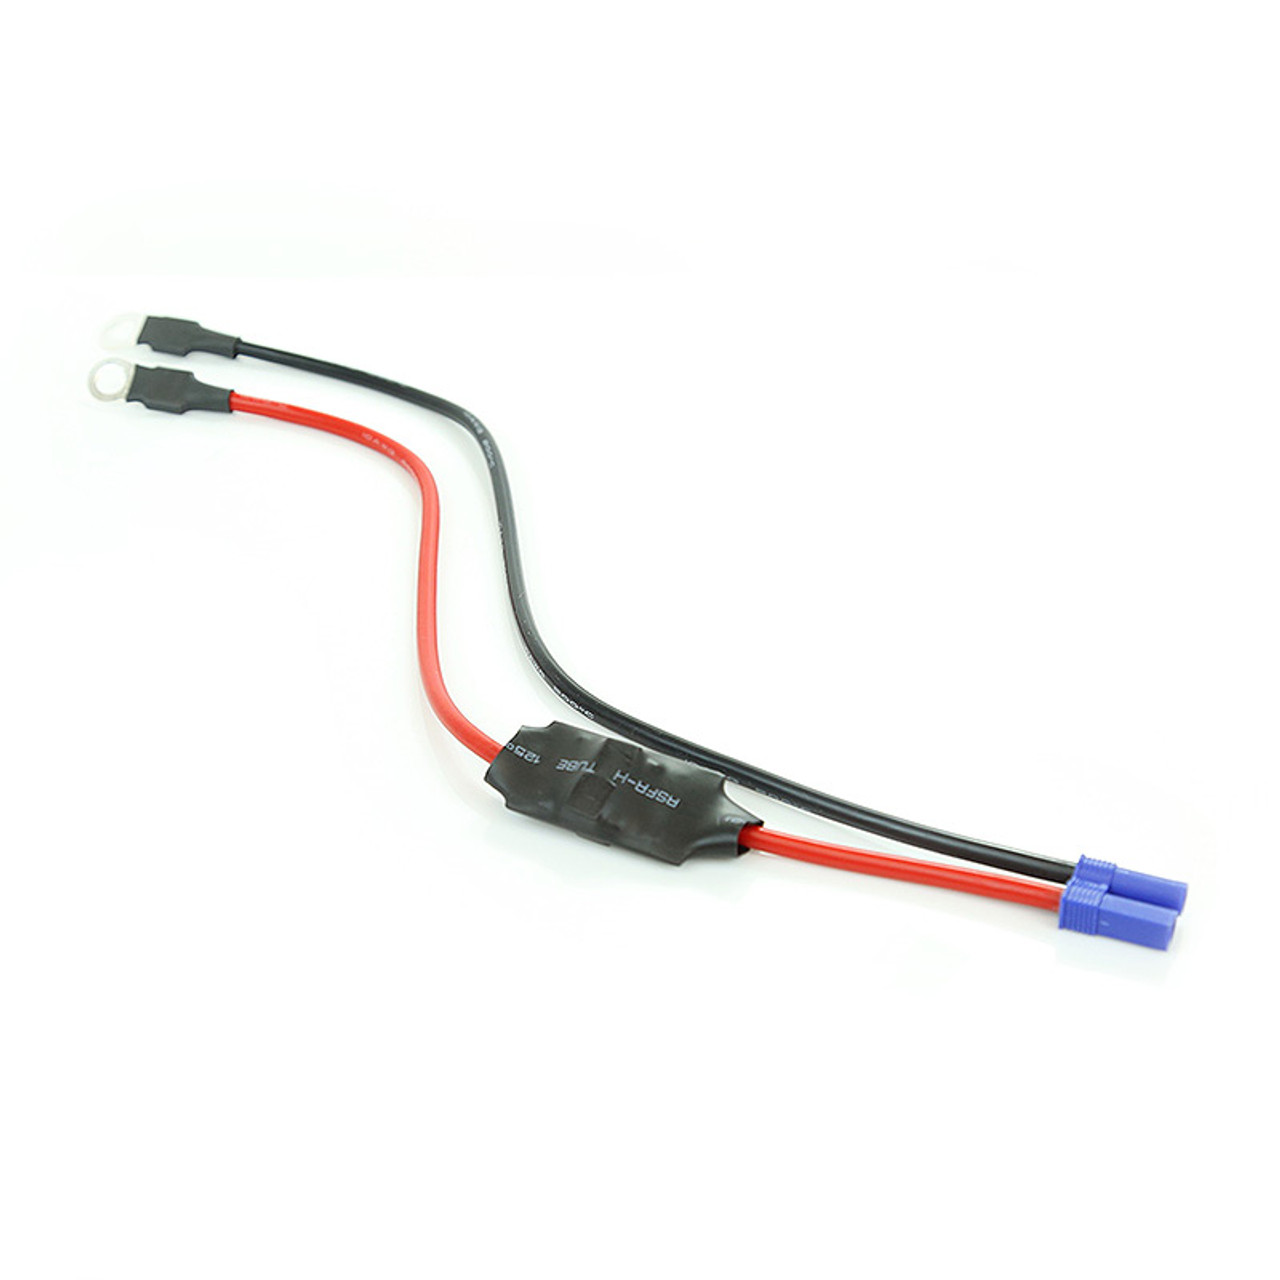 Antigravity Batteries® Clampless Jump Starting Harness - Works